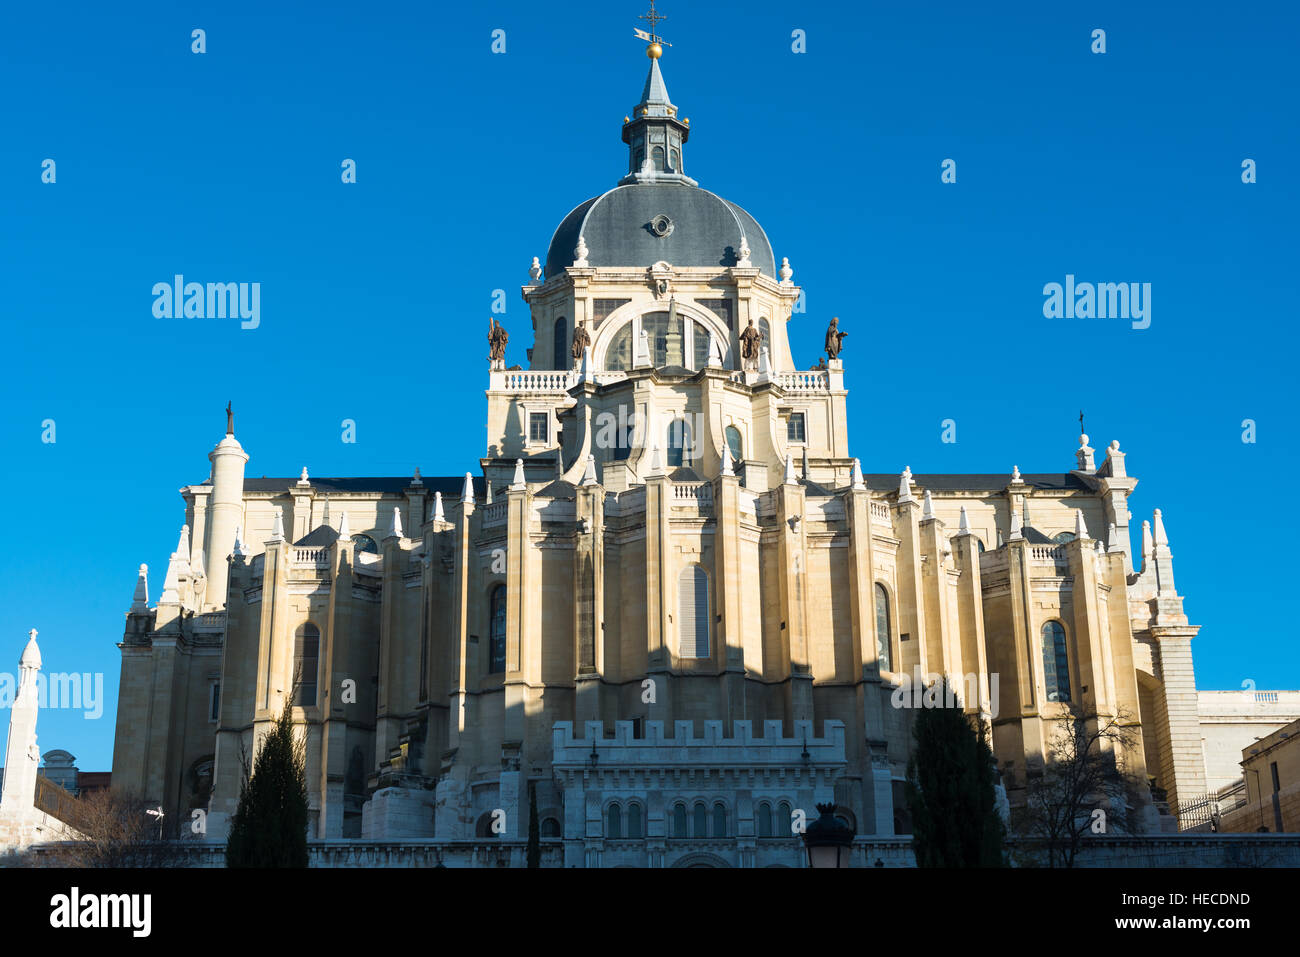 Almudena Cathedral in Madrid, Spain. Stock Photo